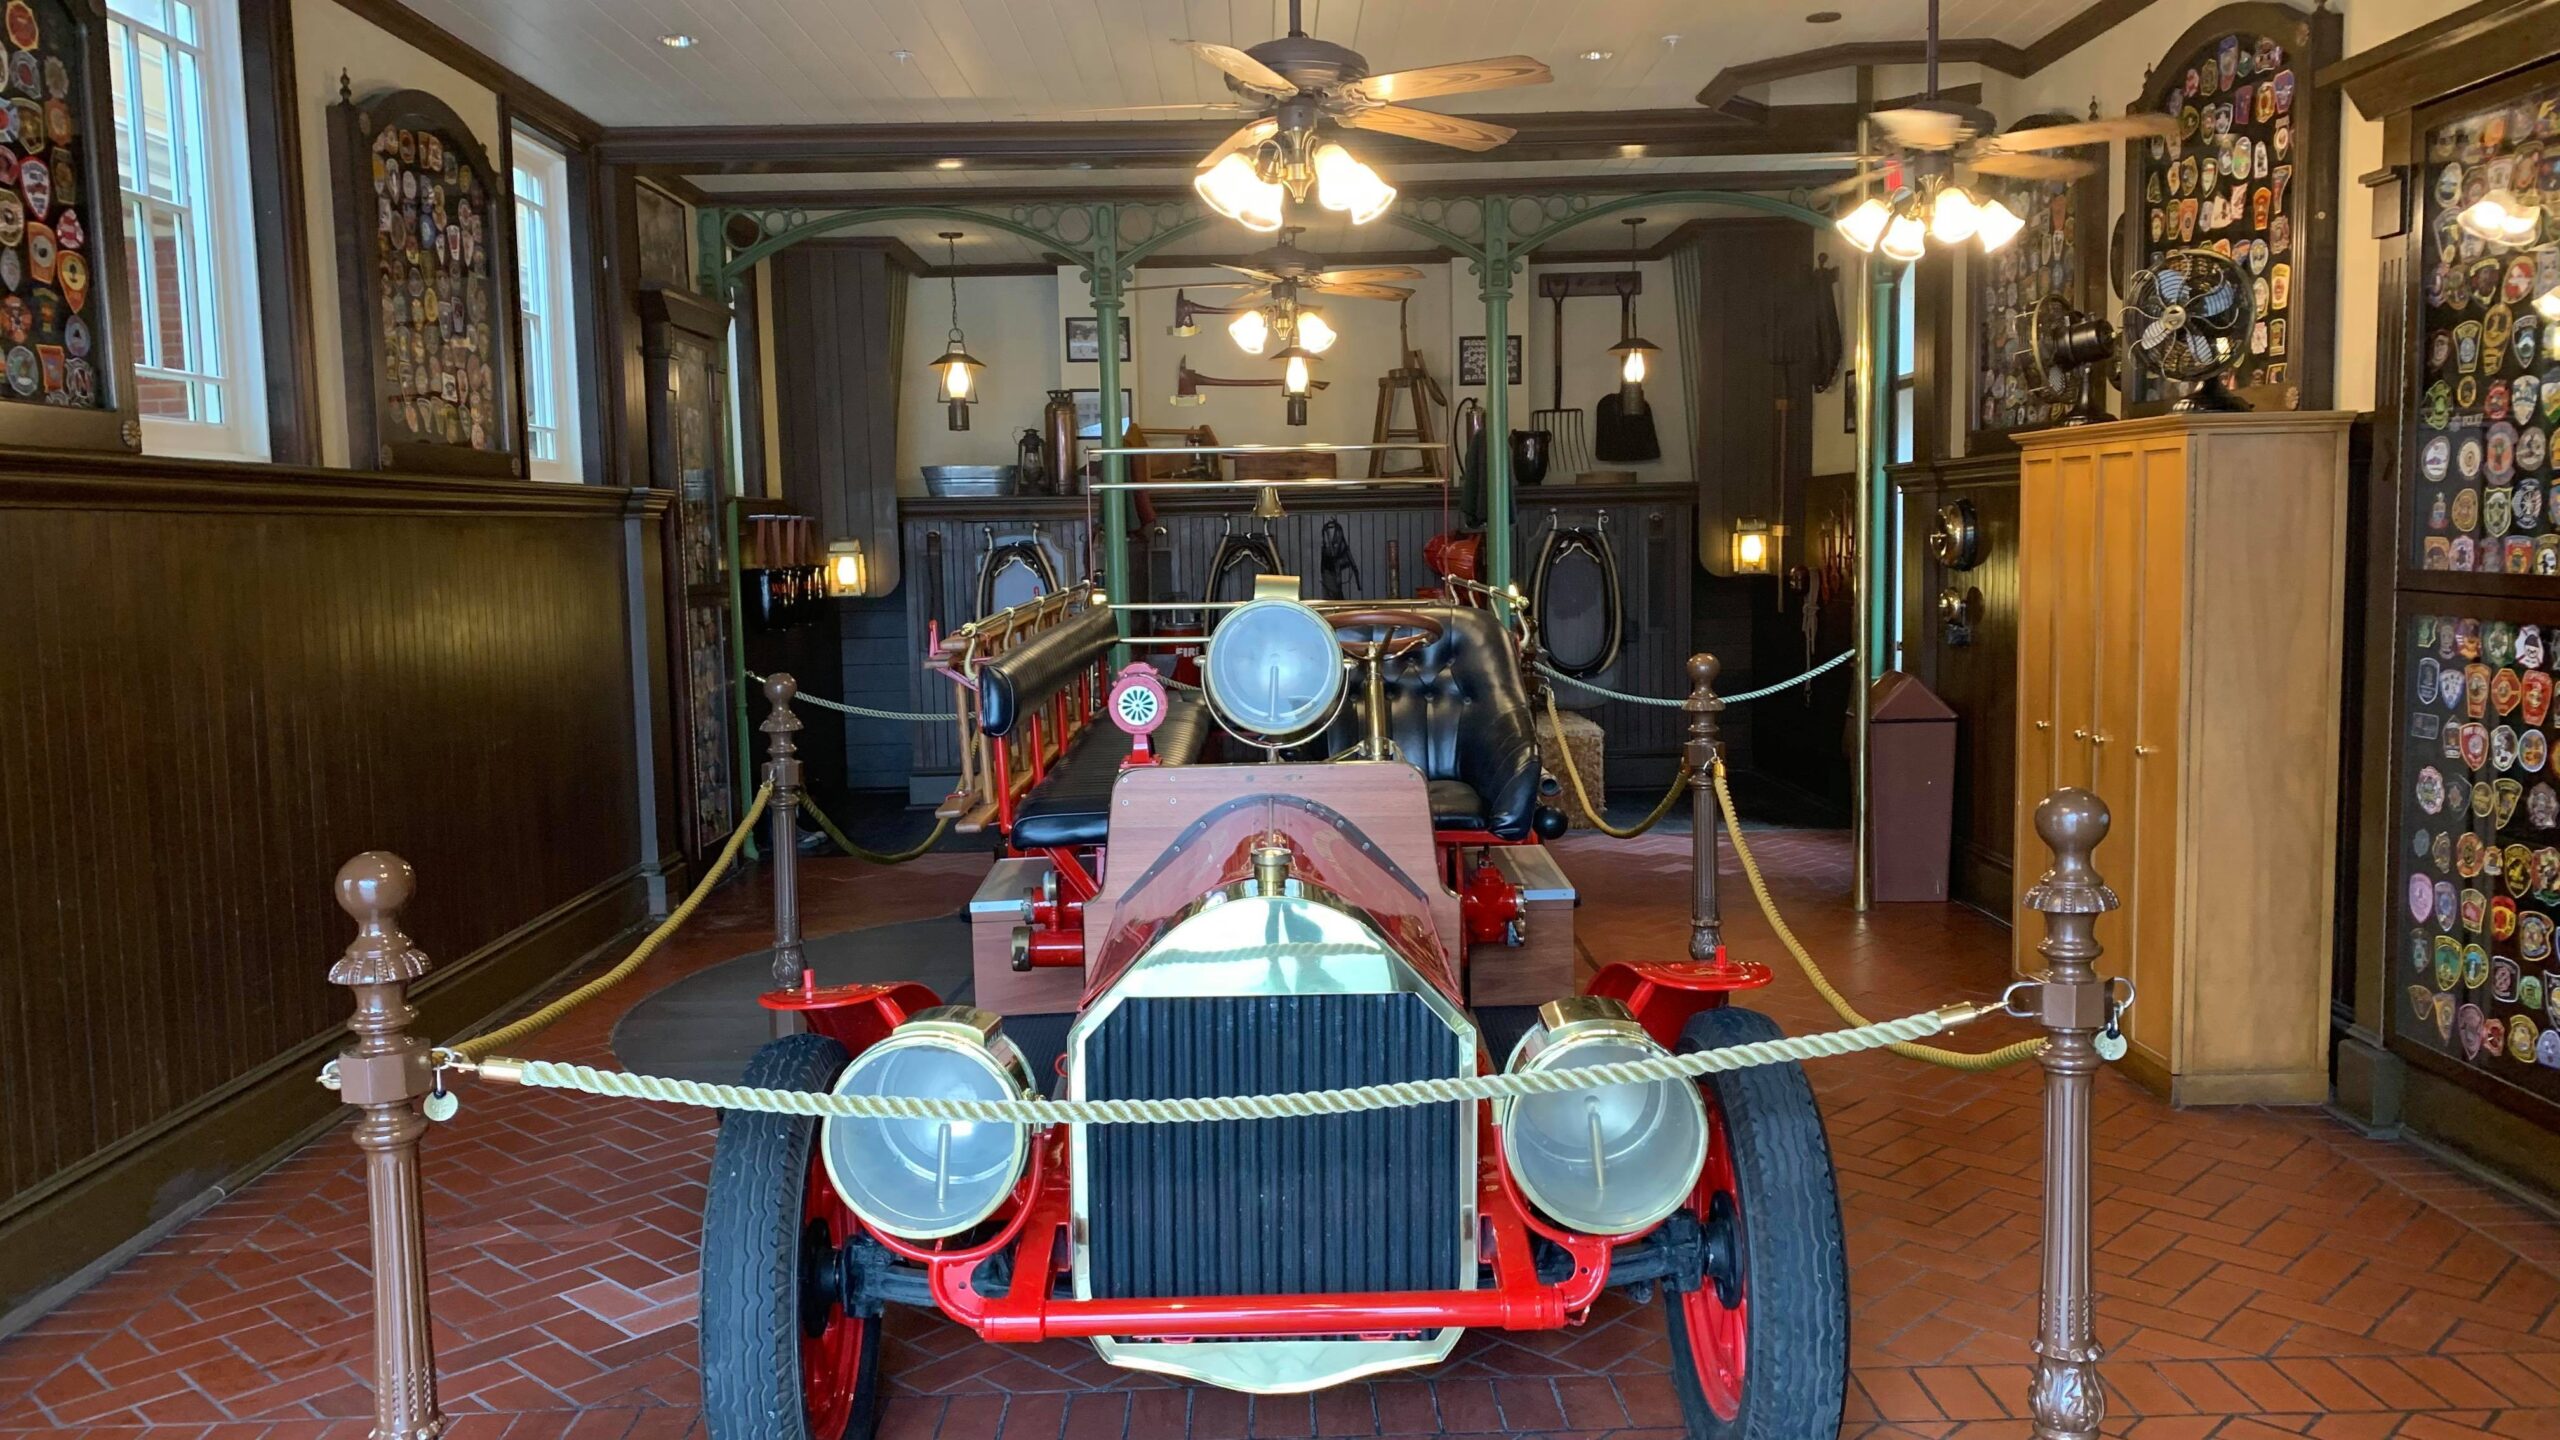 Fire Station reopens with Sorcerer of the Magic Kingdom elements removed